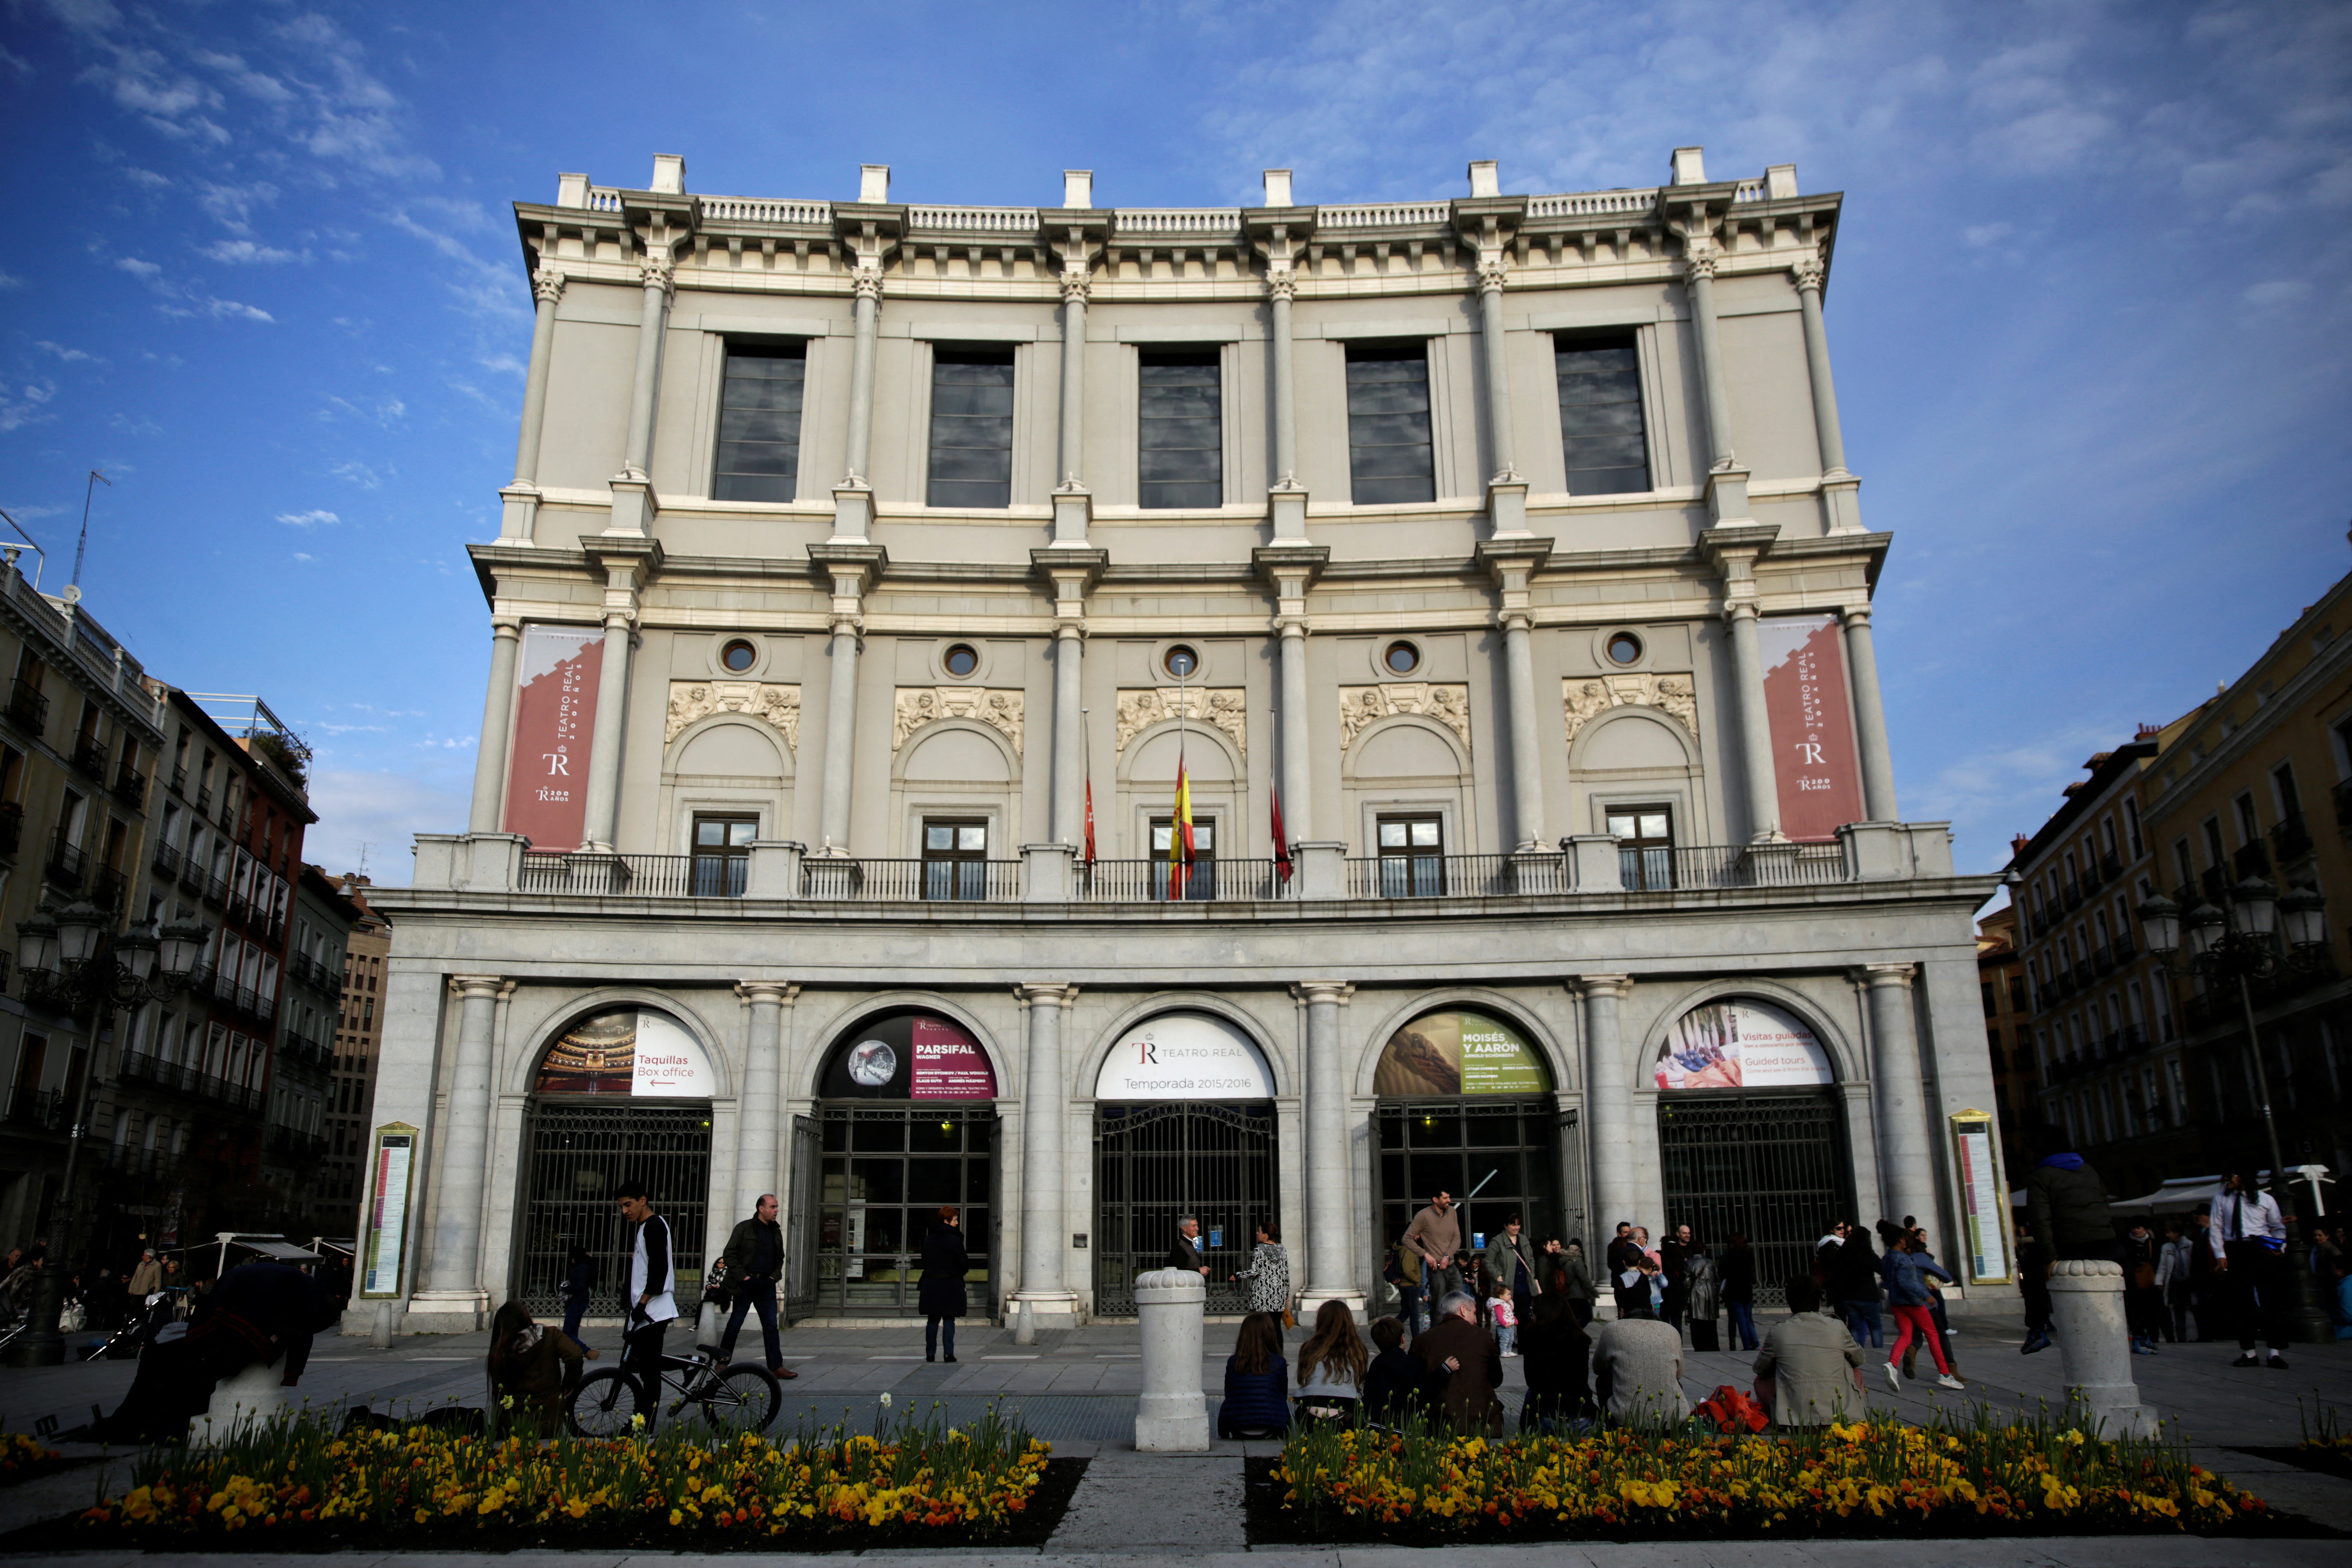 A general view shows the Teatro Real (Royal Theatre), a major opera house, at Plaza de Oriente (Oriente square) in Madrid, Spain